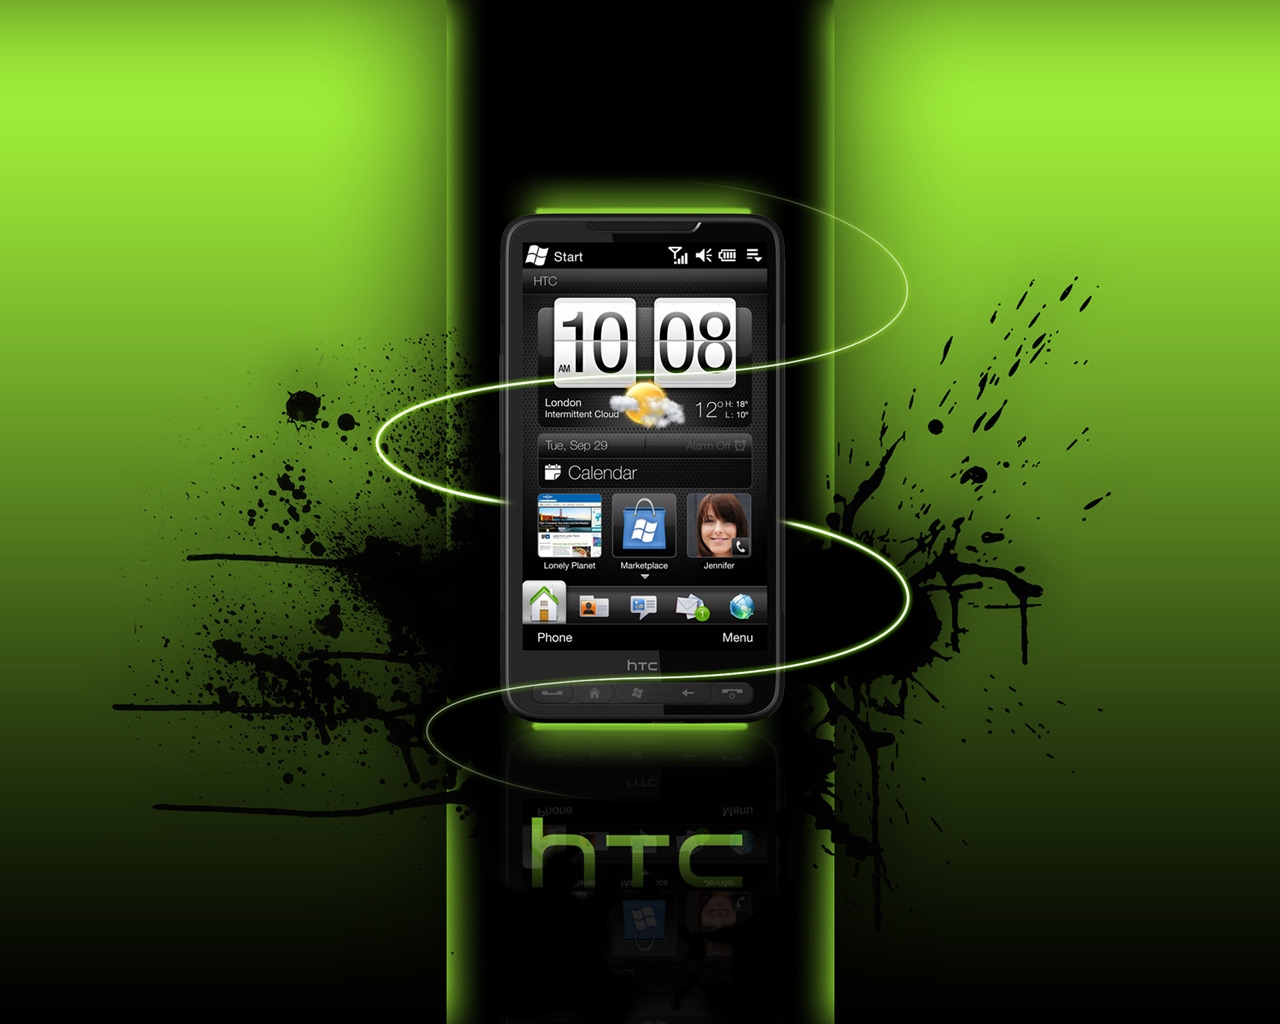 HTC Smartphone for 1280 x 1024 resolution